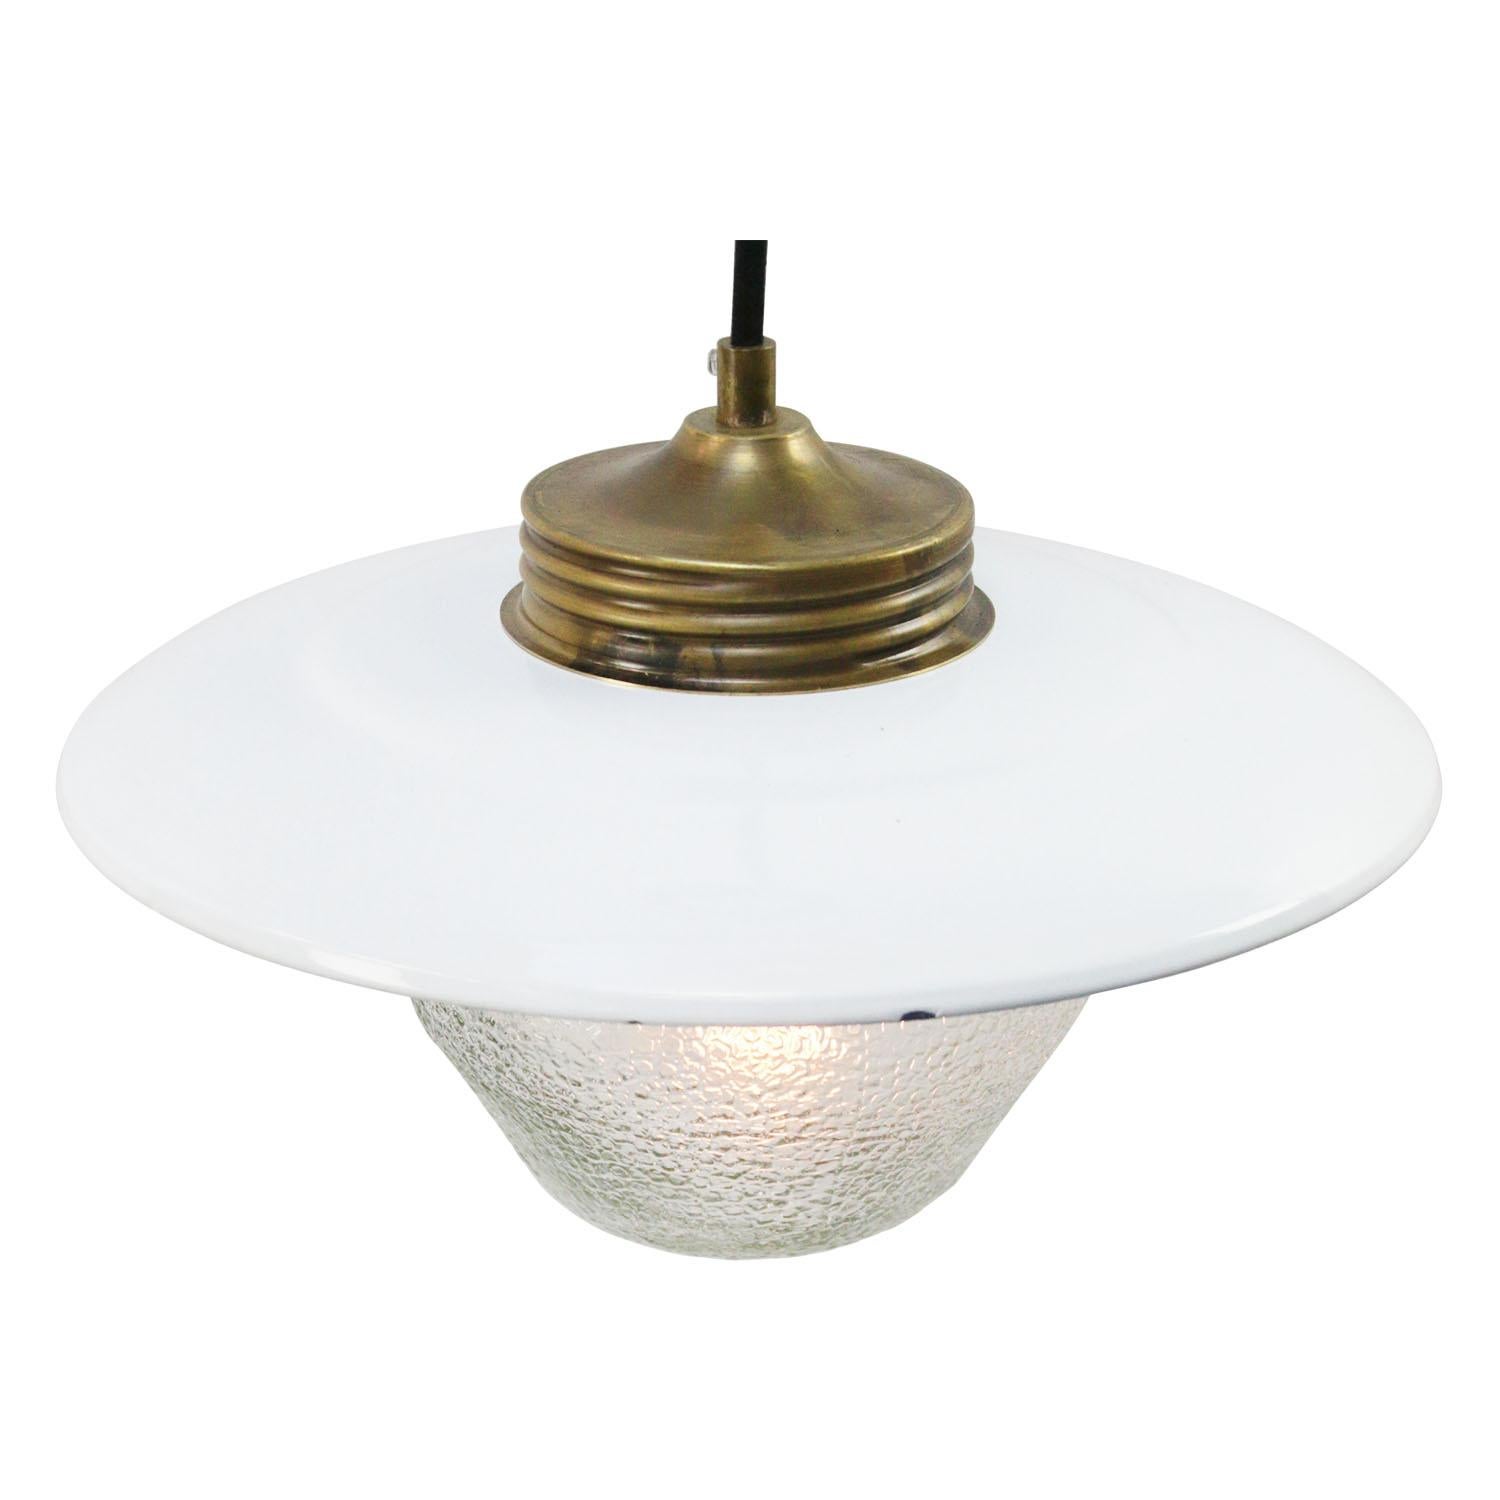 White enamel Industrial hanging lamp.
Frosted glass with brass top.

Weight: 2.40 kg / 5.3 lb

Priced per individual item. All lamps have been made suitable by international standards for incandescent light bulbs, energy-efficient and LED